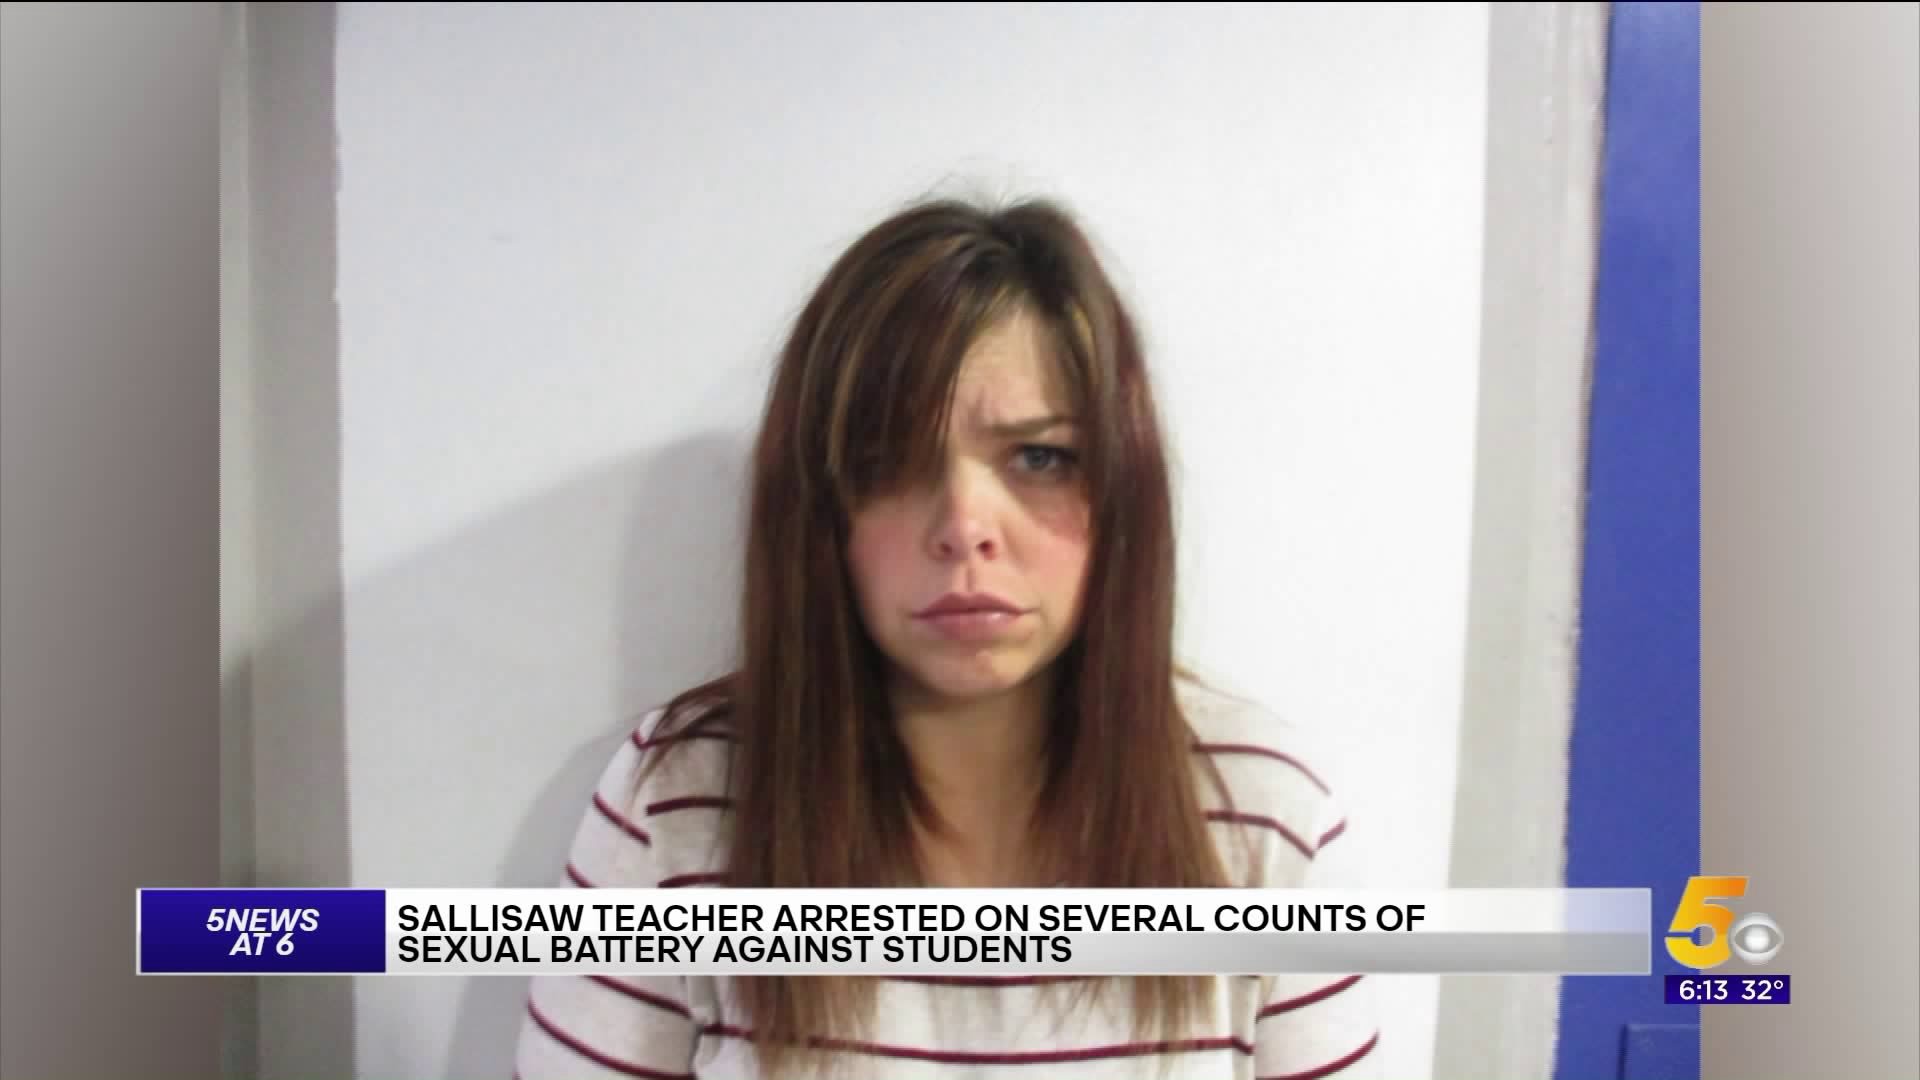 Central Public School Teacher Arrested For Sexual Battery Against